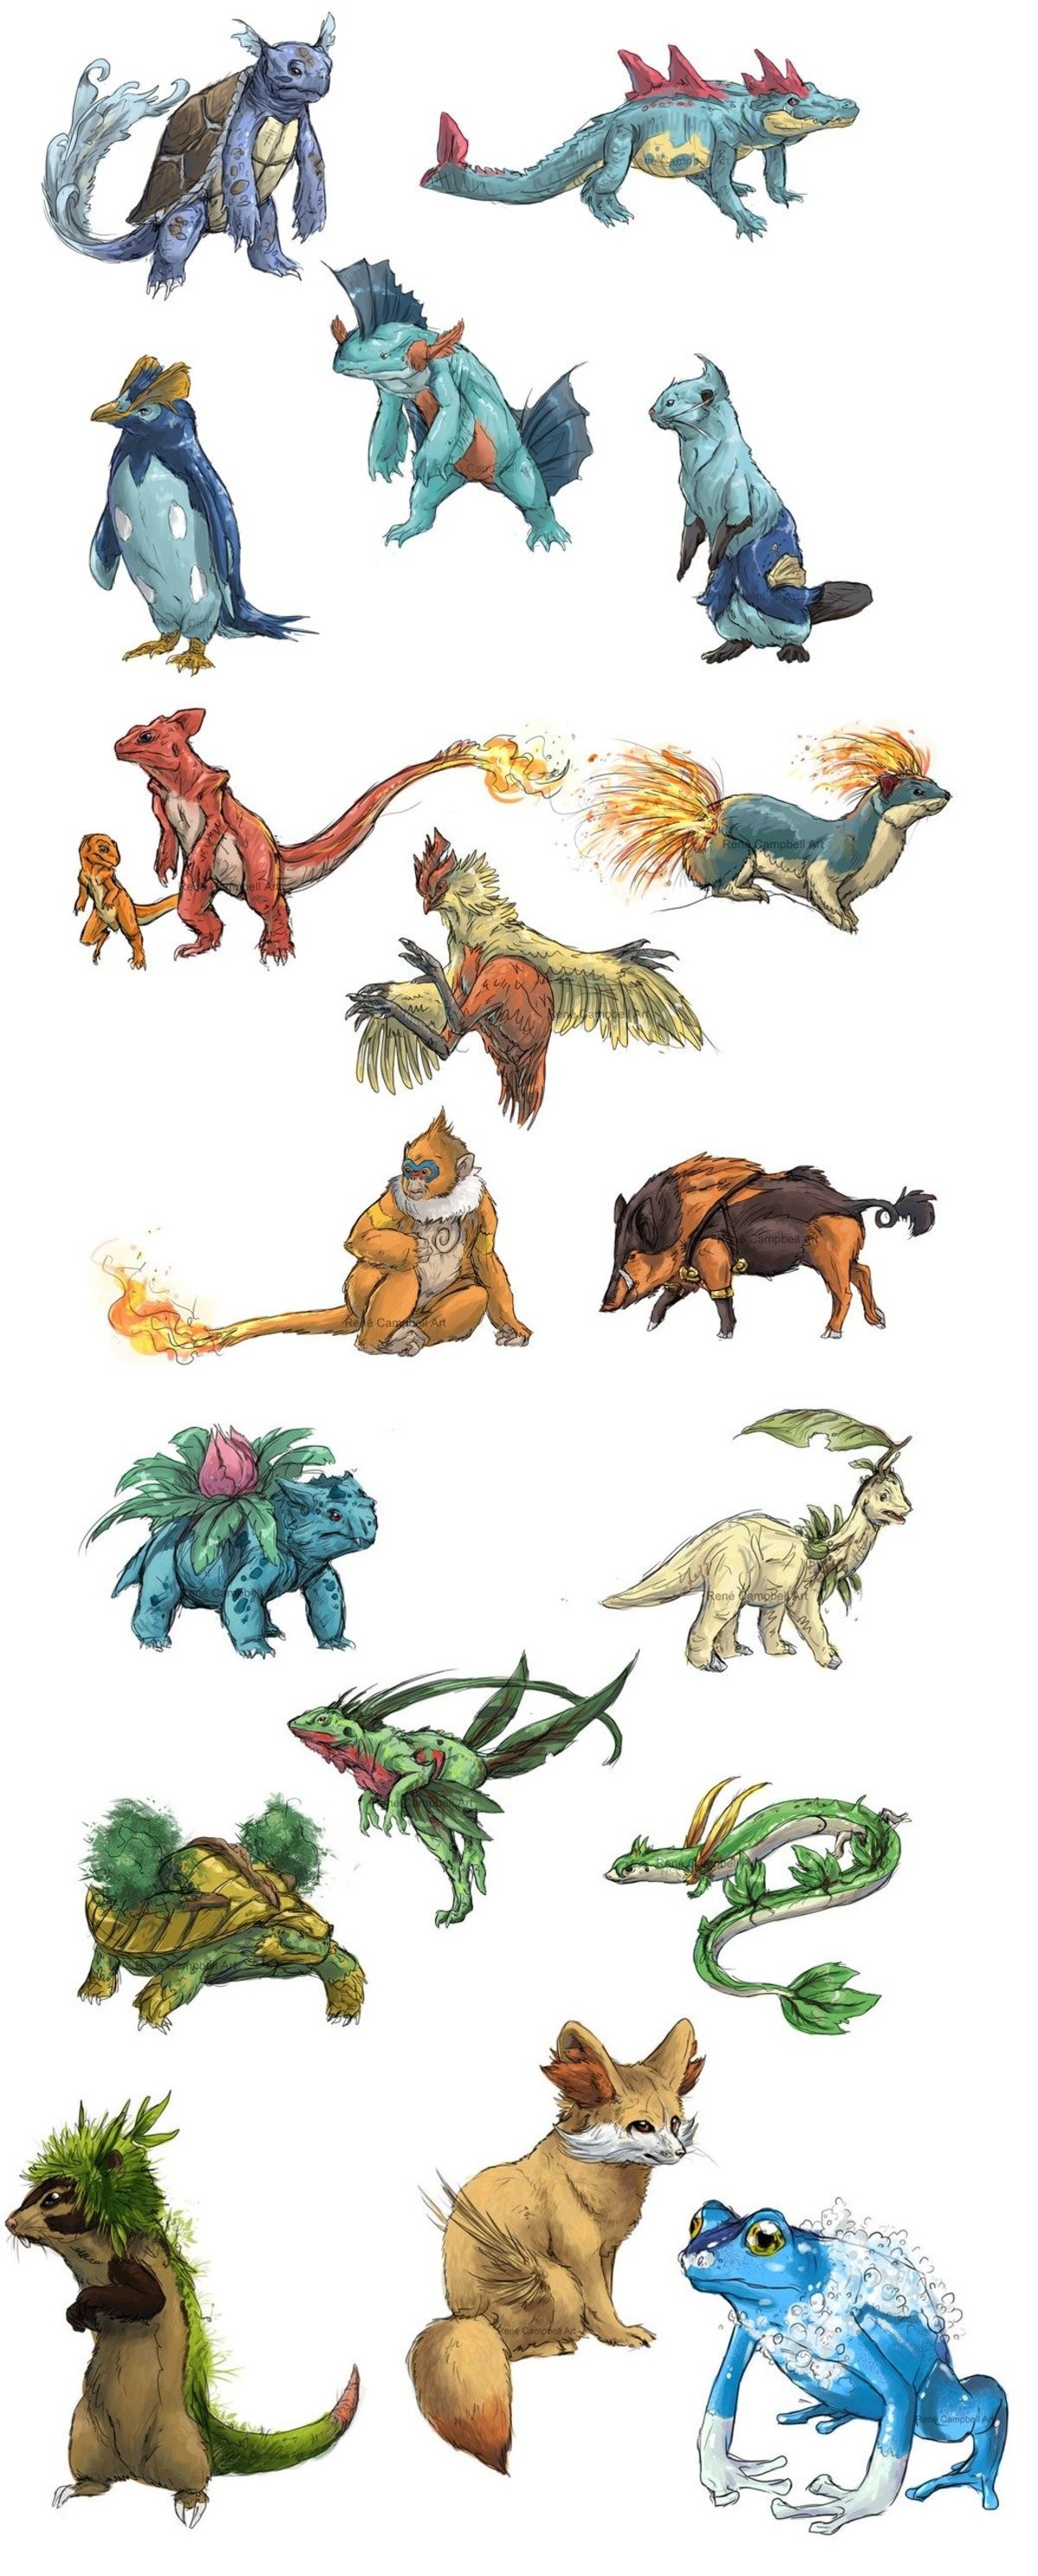 art. join list: ArtAttack (372 subs)Mention History.. I've always loved these pseudo-realistic depictions of pokemon